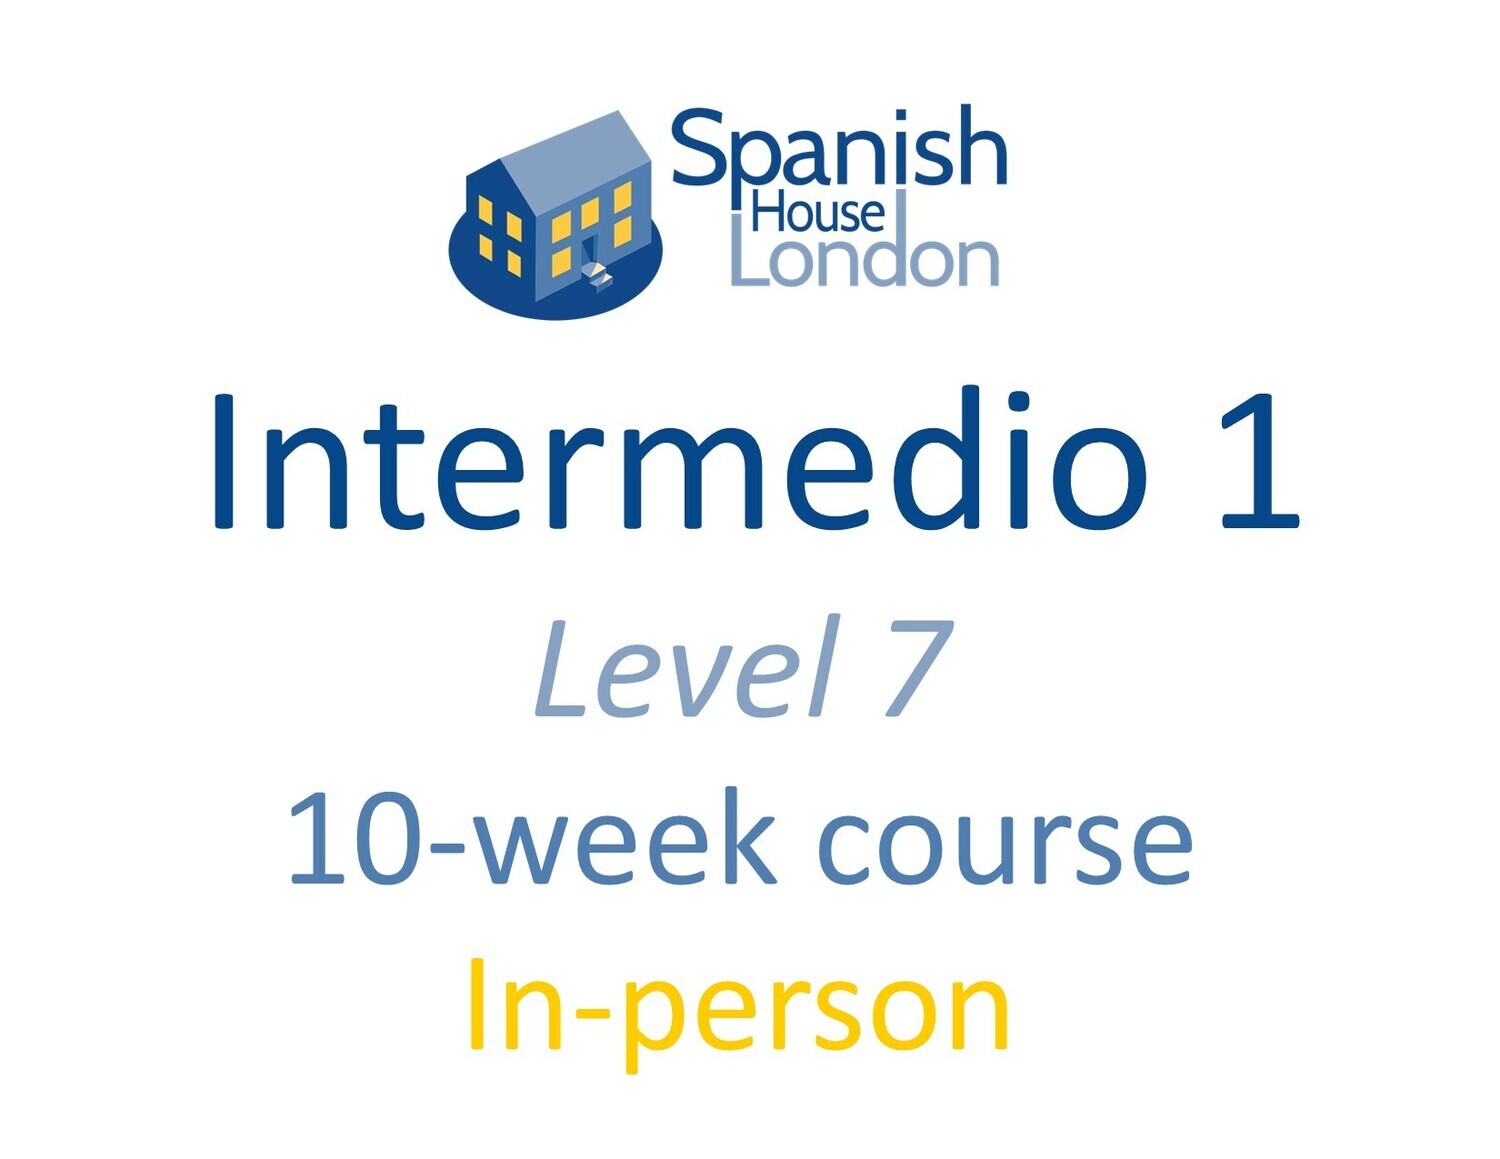 Intermedio 1 Course starting on 20th November at 6pm in Clapham North